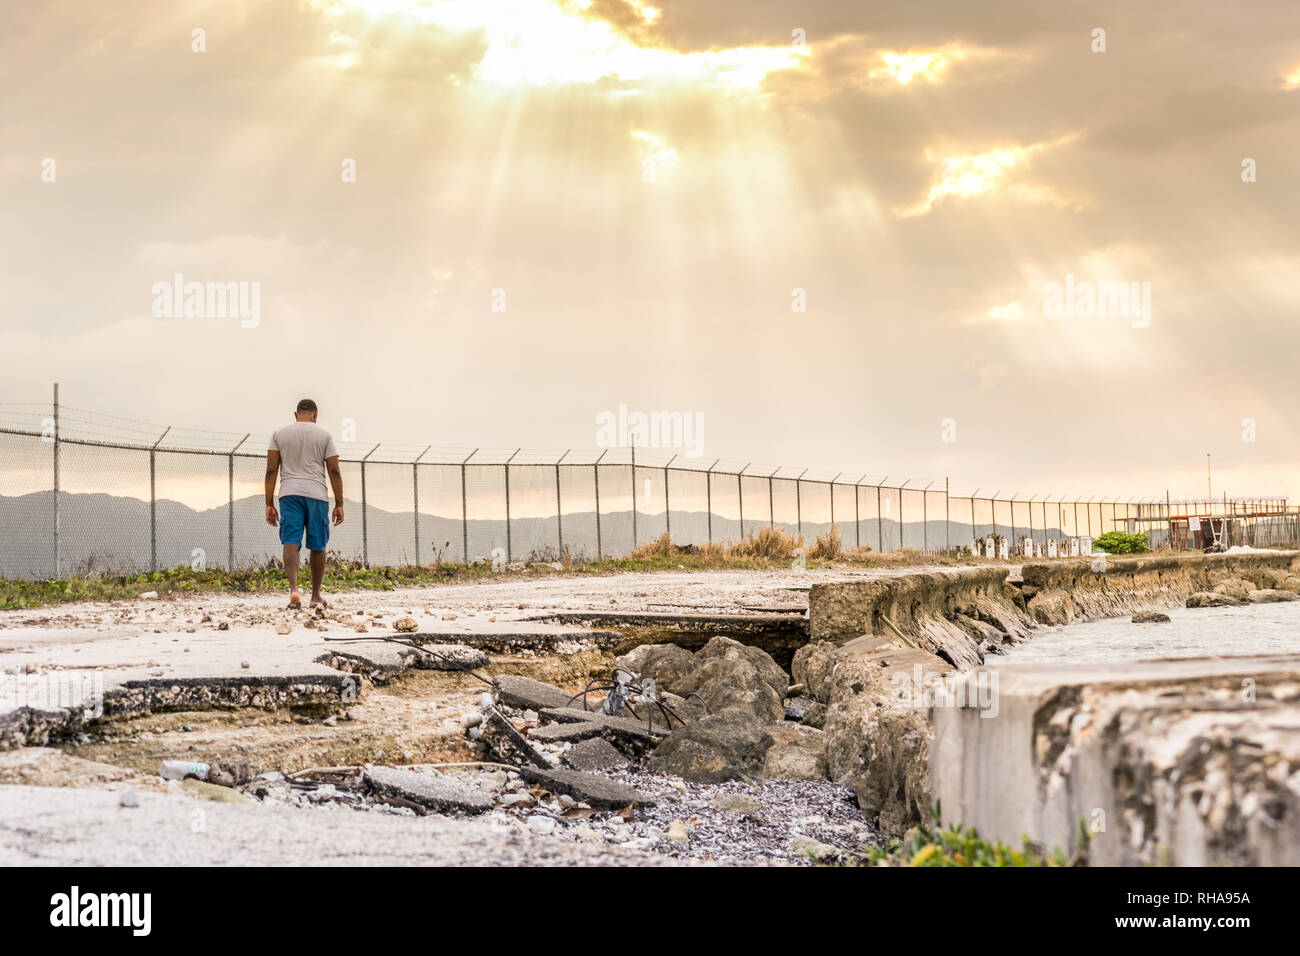 Young black male walking along road damaged by the sea, towards sun rays beaming through clouds. Concept of Hope, Broken Road, Perseverance Stock Photo